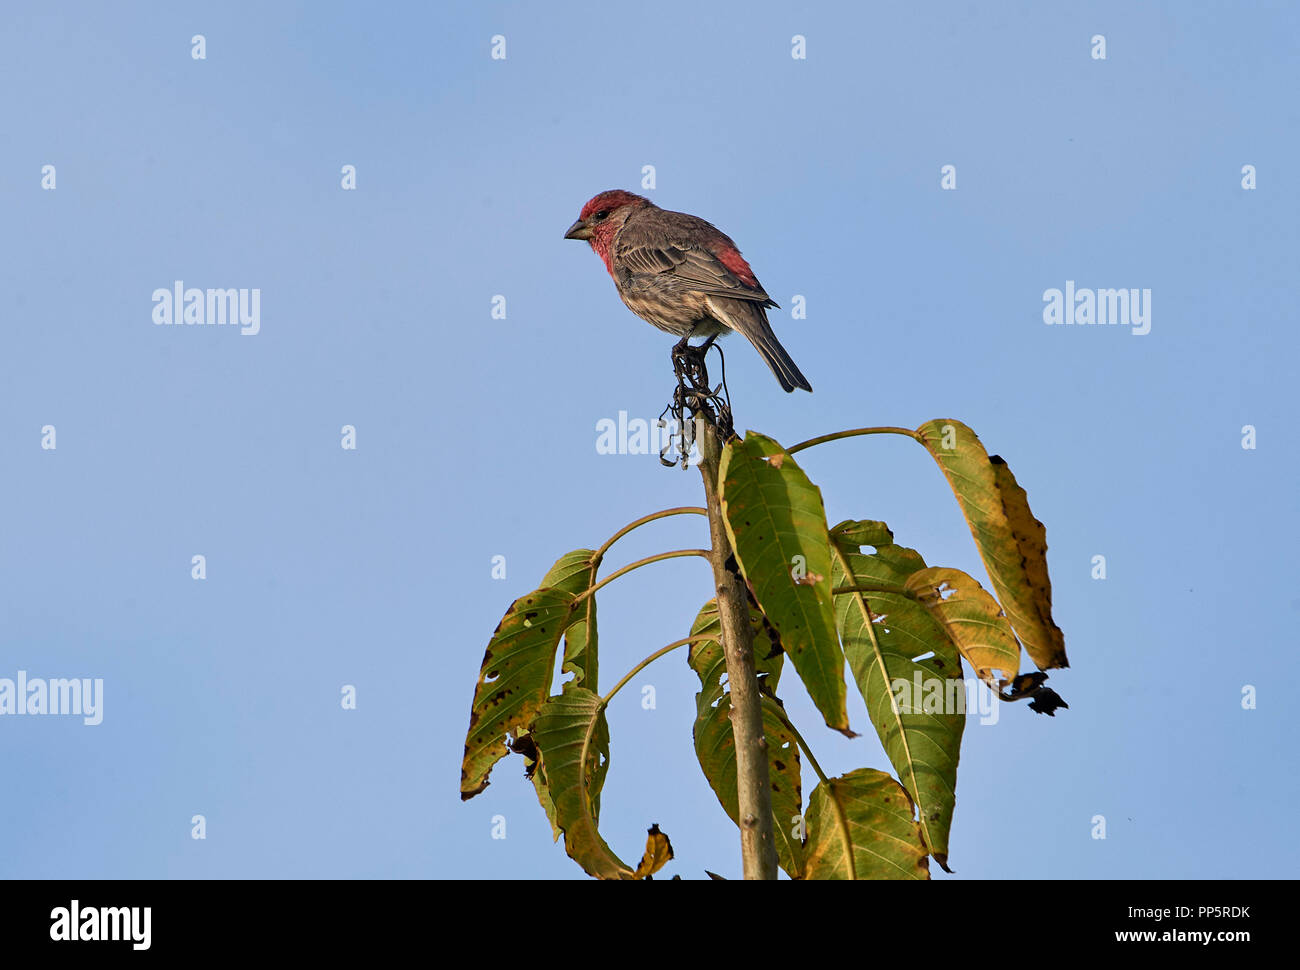 House Finch (Carpodacus mexicanus) perched at the top of a tree, San Juan Cosala, Jalisco, Mexico Stock Photo